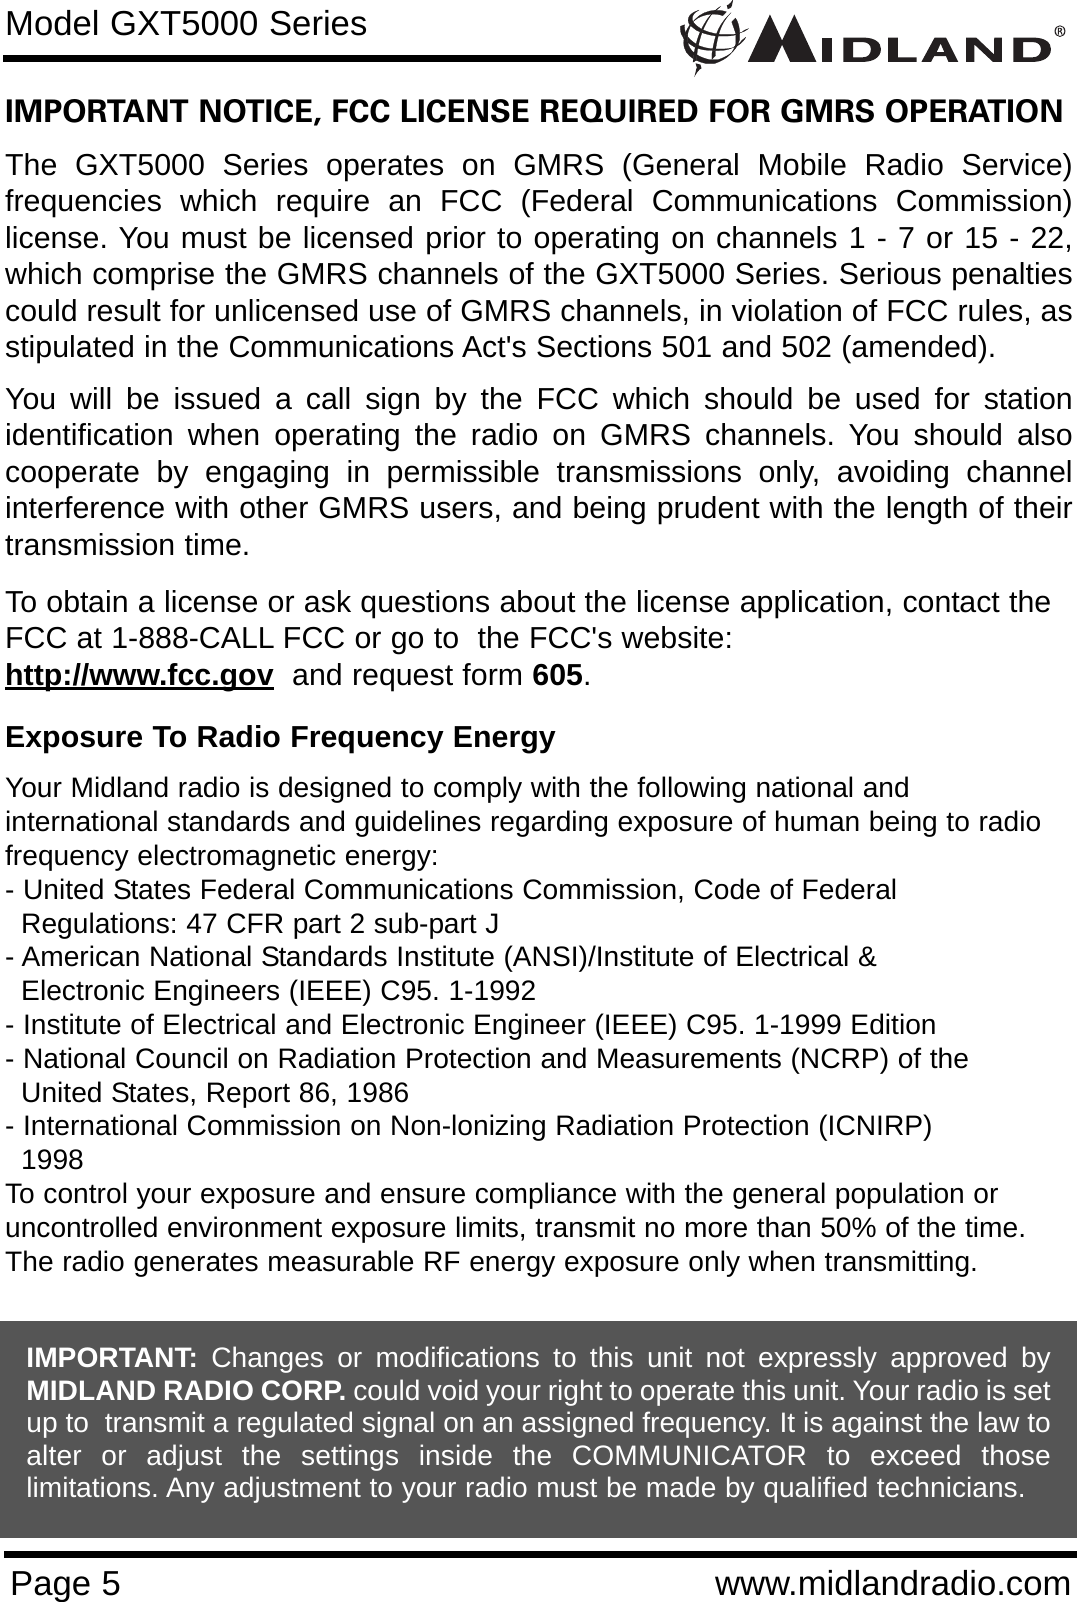 Page 5 www.midlandradio.comIMPORTANT NOTICE, FCC LICENSE REQUIRED FOR GMRS OPERATIONThe GXT5000 Series operates on GMRS (General Mobile Radio Service)frequencies which require an FCC (Federal Communications Commission)license. You must be licensed prior to operating on channels 1 - 7 or 15 - 22,which comprise the GMRS channels of the GXT5000 Series. Serious penaltiescould result for unlicensed use of GMRS channels, in violation of FCC rules, asstipulated in the Communications Act&apos;s Sections 501 and 502 (amended).You will be issued a call sign by the FCC which should be used for stationidentification when operating the radio on GMRS channels. You should alsocooperate by engaging in permissible transmissions only, avoiding channelinterference with other GMRS users, and being prudent with the length of theirtransmission time.To obtain a license or ask questions about the license application, contact theFCC at 1-888-CALL FCC or go to  the FCC&apos;s website:  http://www.fcc.gov and request form 605.Exposure To Radio Frequency EnergyYour Midland radio is designed to comply with the following national and international standards and guidelines regarding exposure of human being to radiofrequency electromagnetic energy:- United States Federal Communications Commission, Code of Federal Regulations: 47 CFR part 2 sub-part J- American National Standards Institute (ANSI)/Institute of Electrical &amp; Electronic Engineers (IEEE) C95. 1-1992- Institute of Electrical and Electronic Engineer (IEEE) C95. 1-1999 Edition- National Council on Radiation Protection and Measurements (NCRP) of the United States, Report 86, 1986- International Commission on Non-lonizing Radiation Protection (ICNIRP) 1998To control your exposure and ensure compliance with the general population oruncontrolled environment exposure limits, transmit no more than 50% of the time.The radio generates measurable RF energy exposure only when transmitting.Model GXT5000 SeriesIMPORTANT: Changes or modifications to this unit not expressly approved byMIDLAND RADIO CORP. could void your right to operate this unit. Your radio is setup to  transmit a regulated signal on an assigned frequency. It is against the law toalter or adjust the settings inside the COMMUNICATOR to exceed thoselimitations. Any adjustment to your radio must be made by qualified technicians.